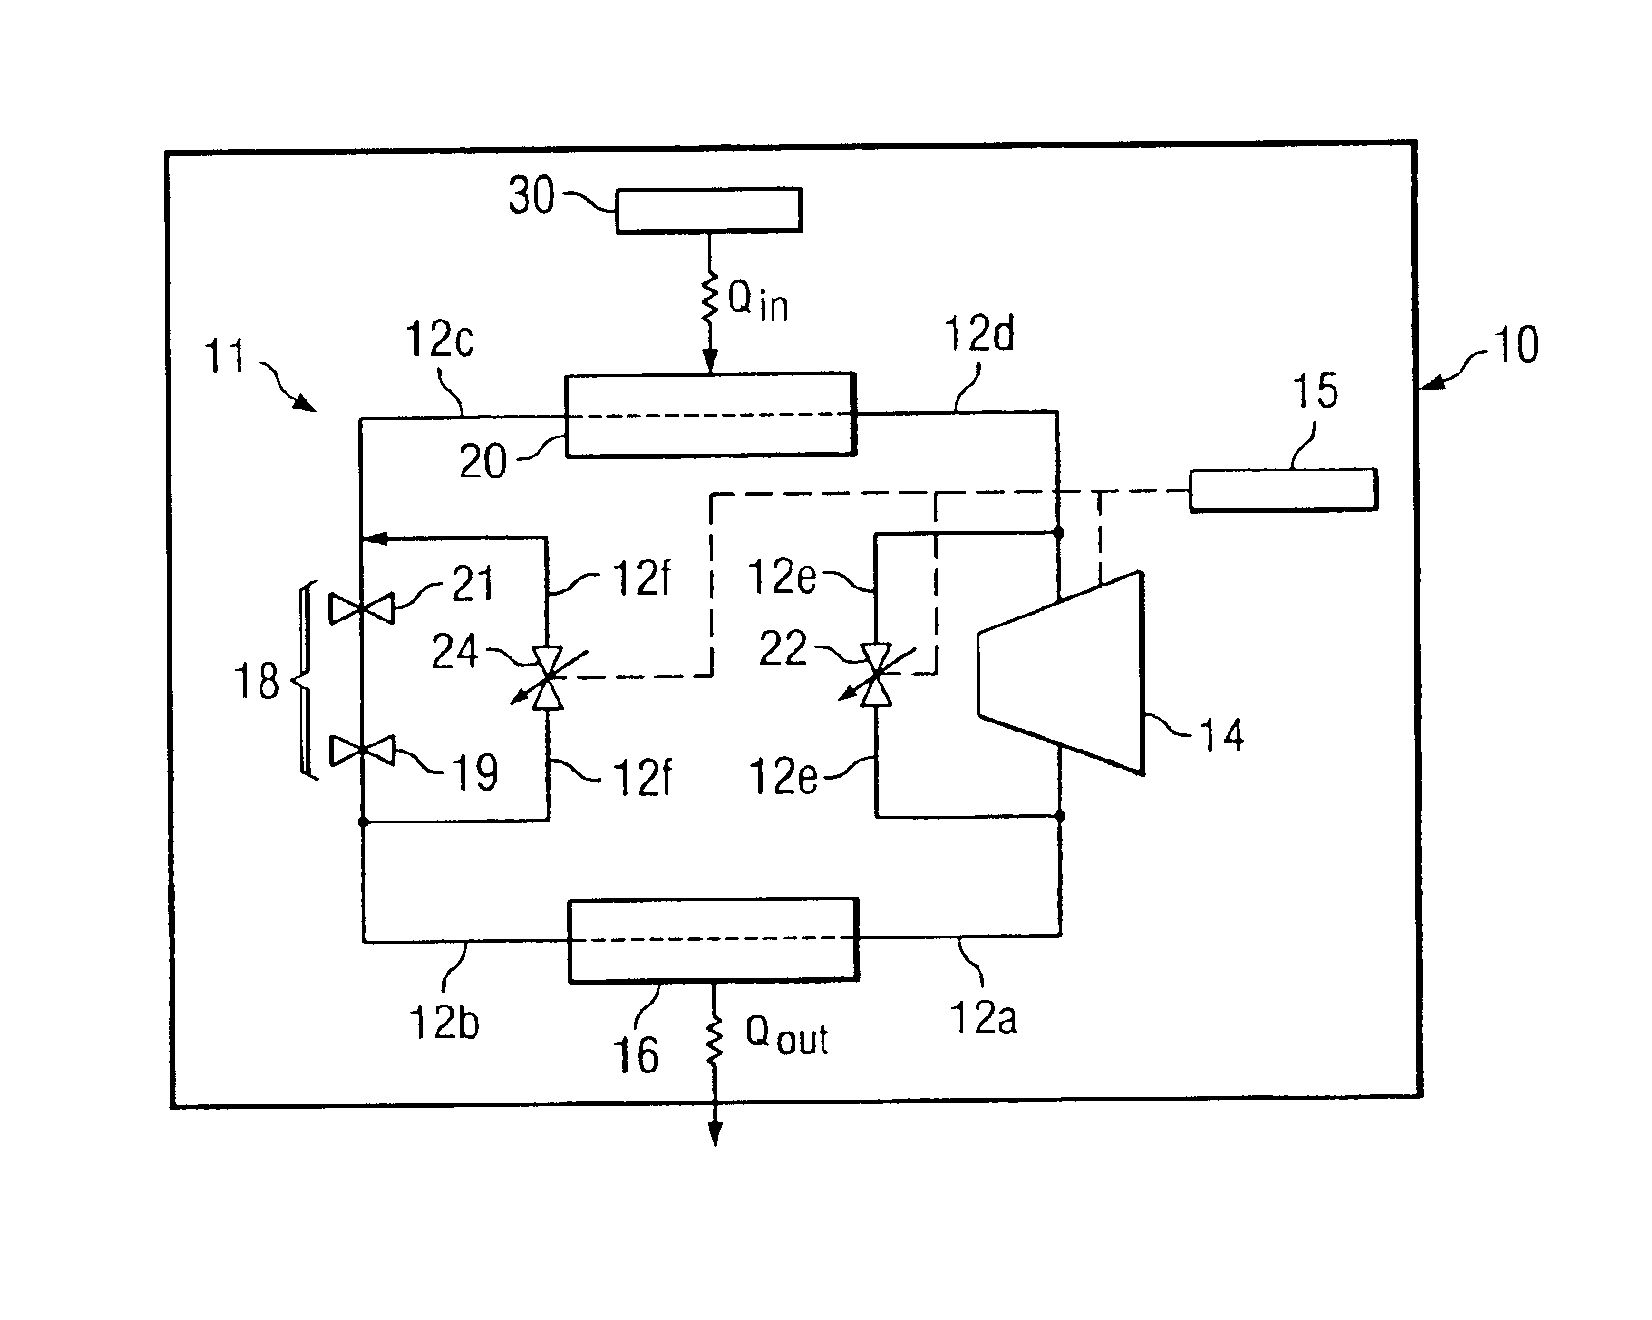 Power management of a computer with vapor-cooled processor